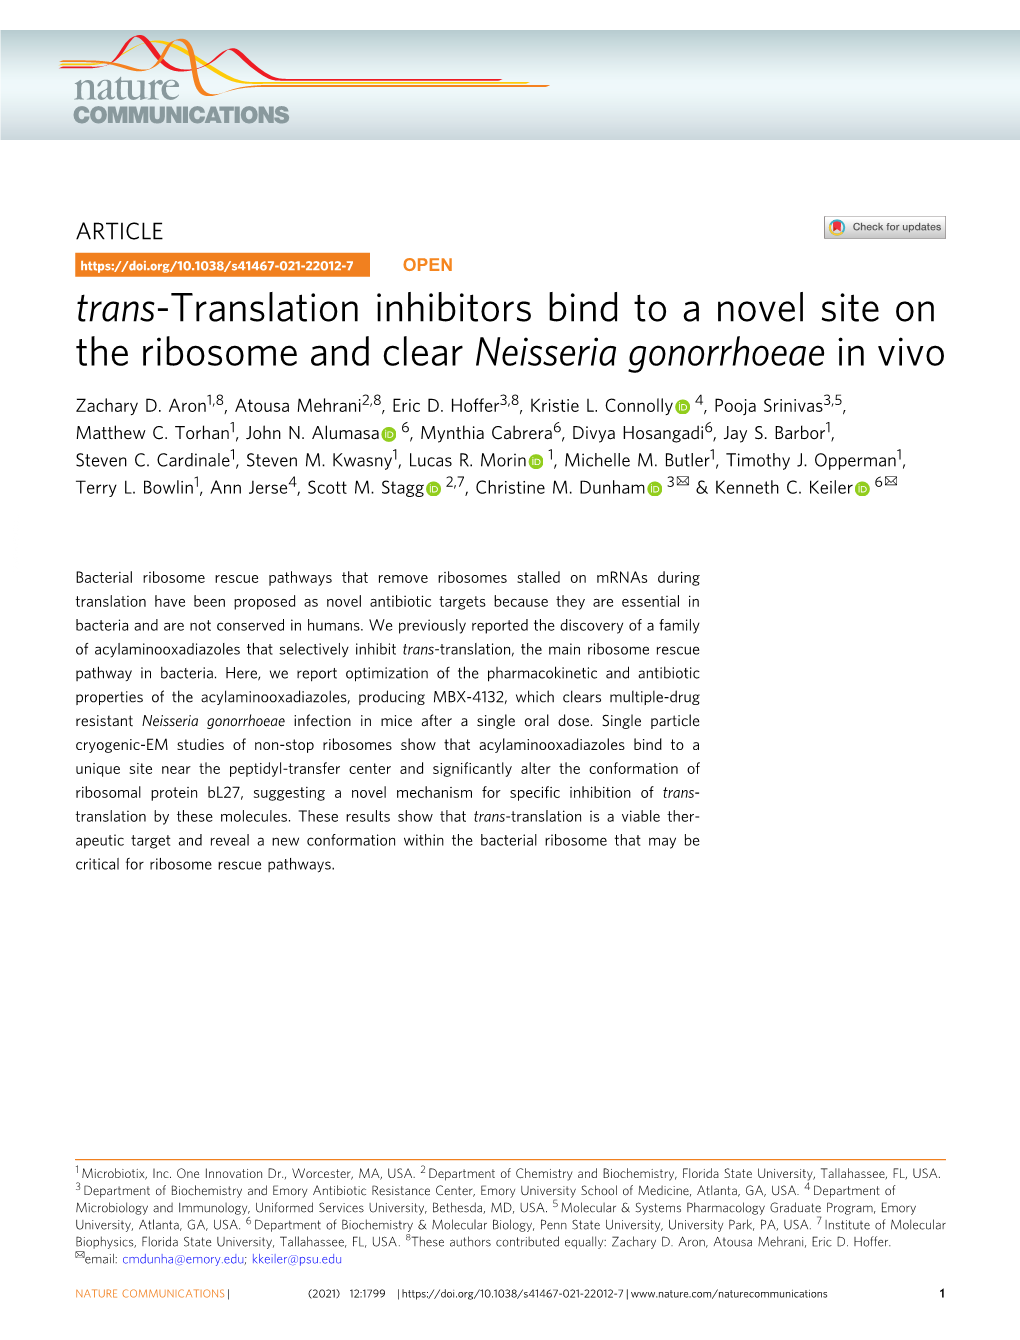 Trans-Translation Inhibitors Bind to a Novel Site on the Ribosome and Clear Neisseria Gonorrhoeae in Vivo